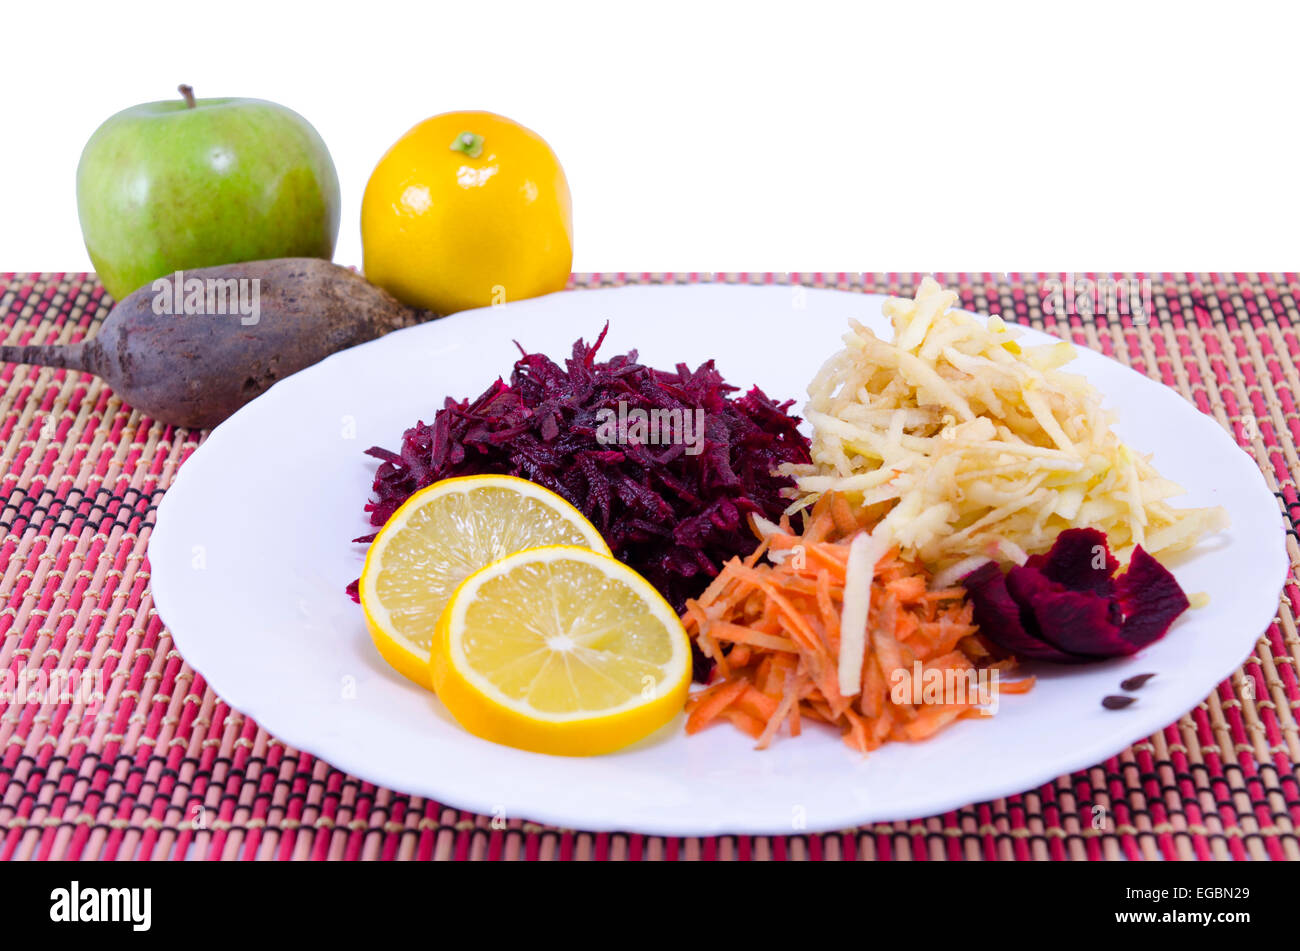 Grated carrots beet and apples with whole apples, lemon and bleet in the background Stock Photo